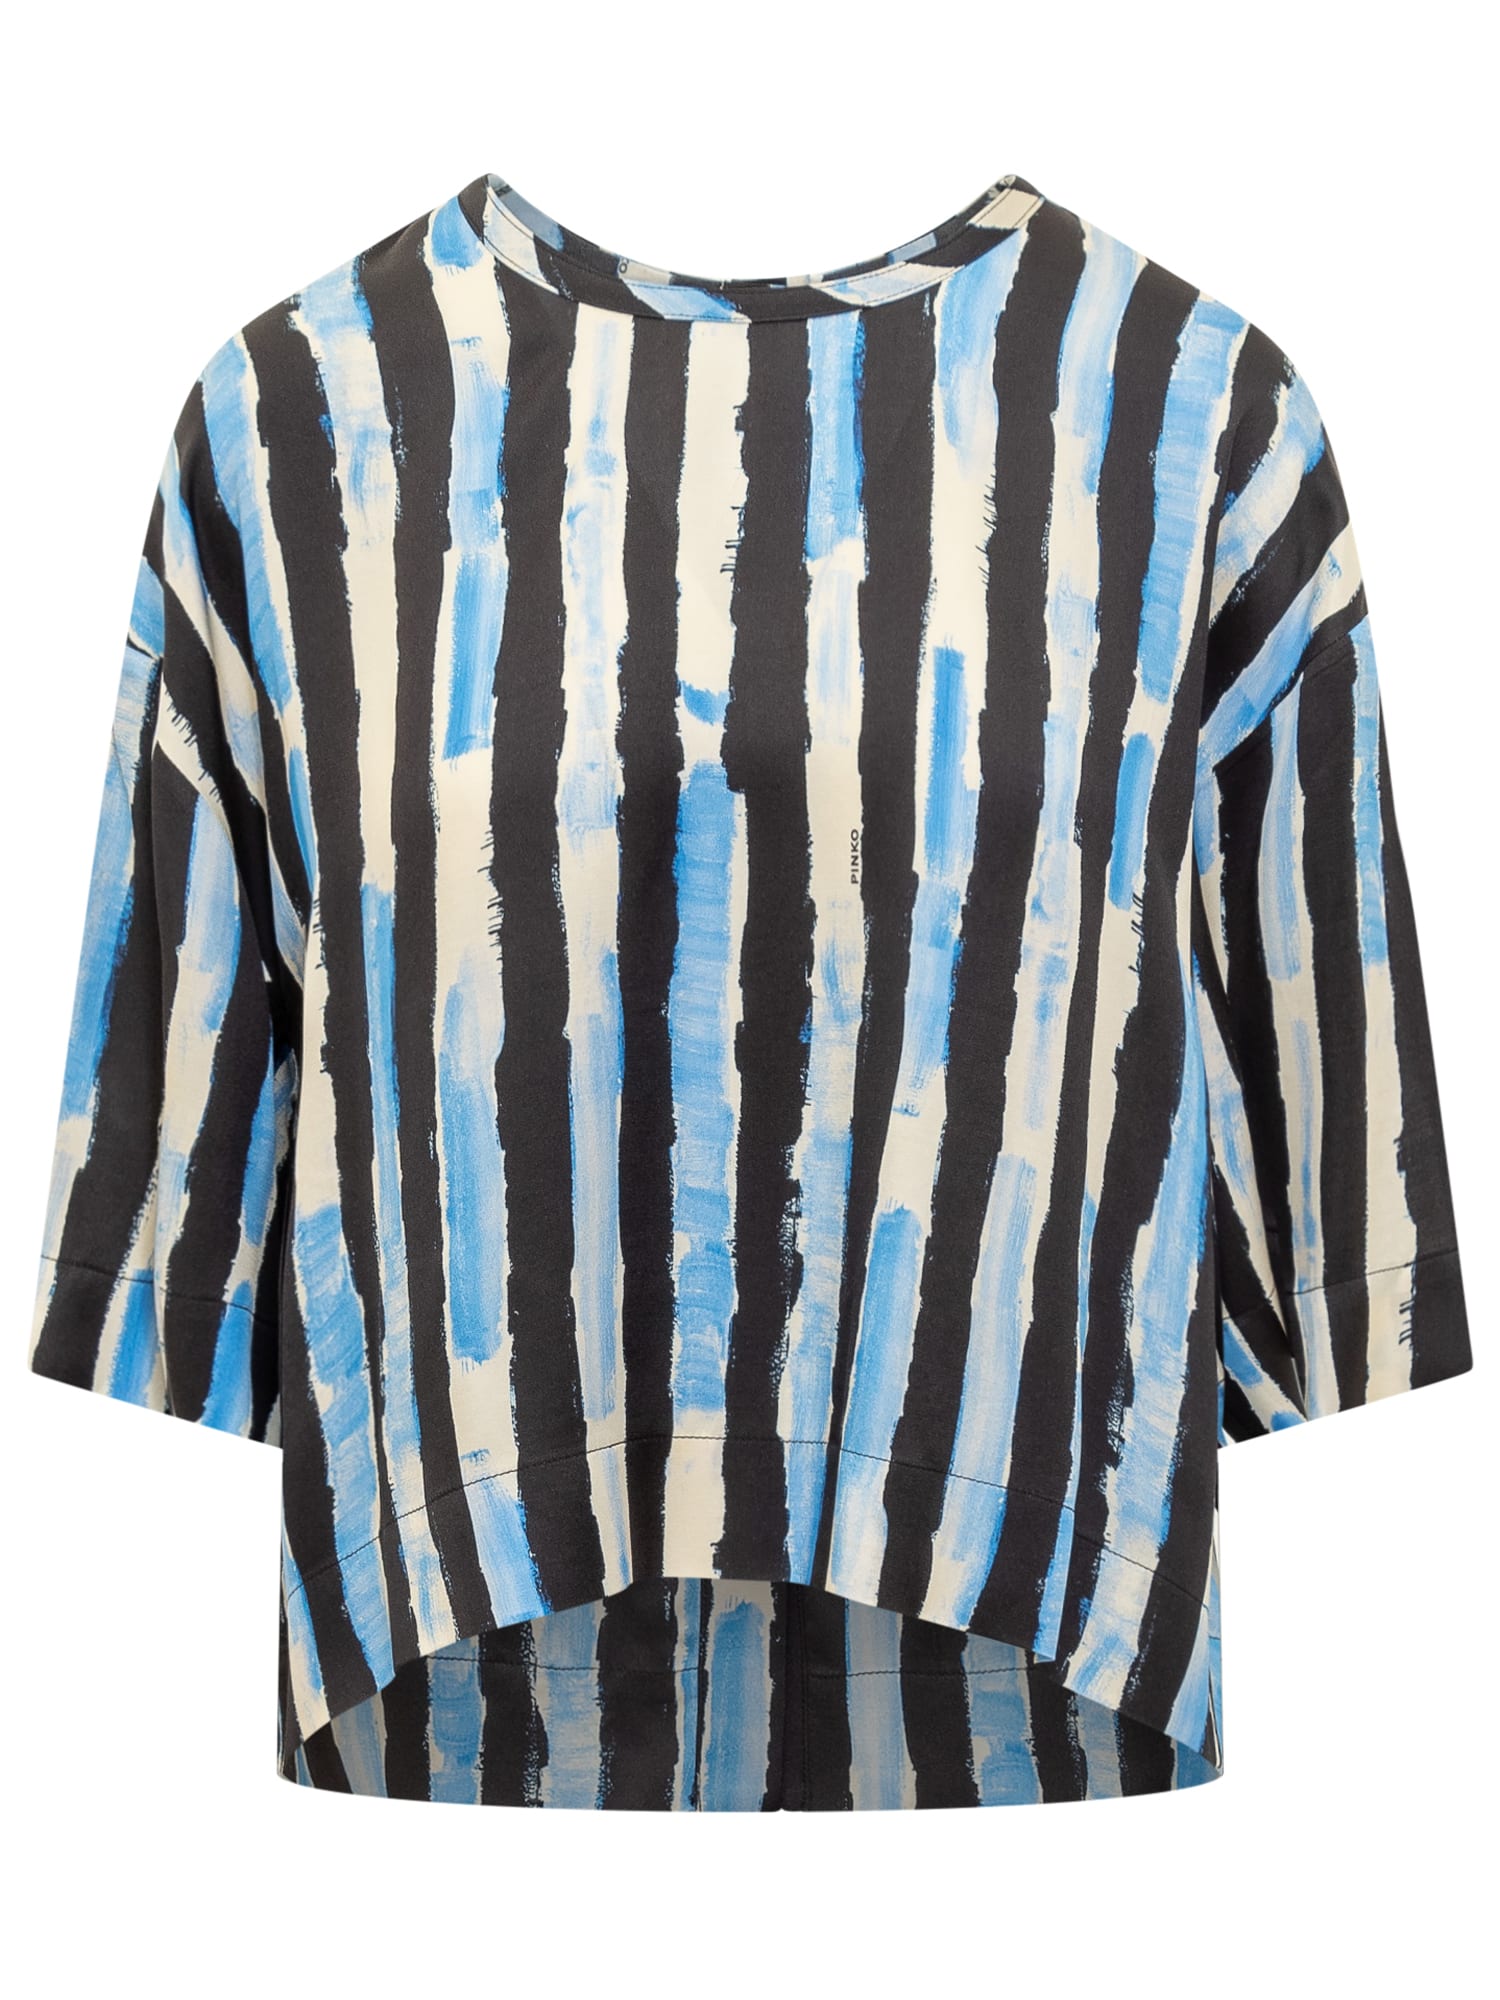 Blouse With Pictorial Stripe Print